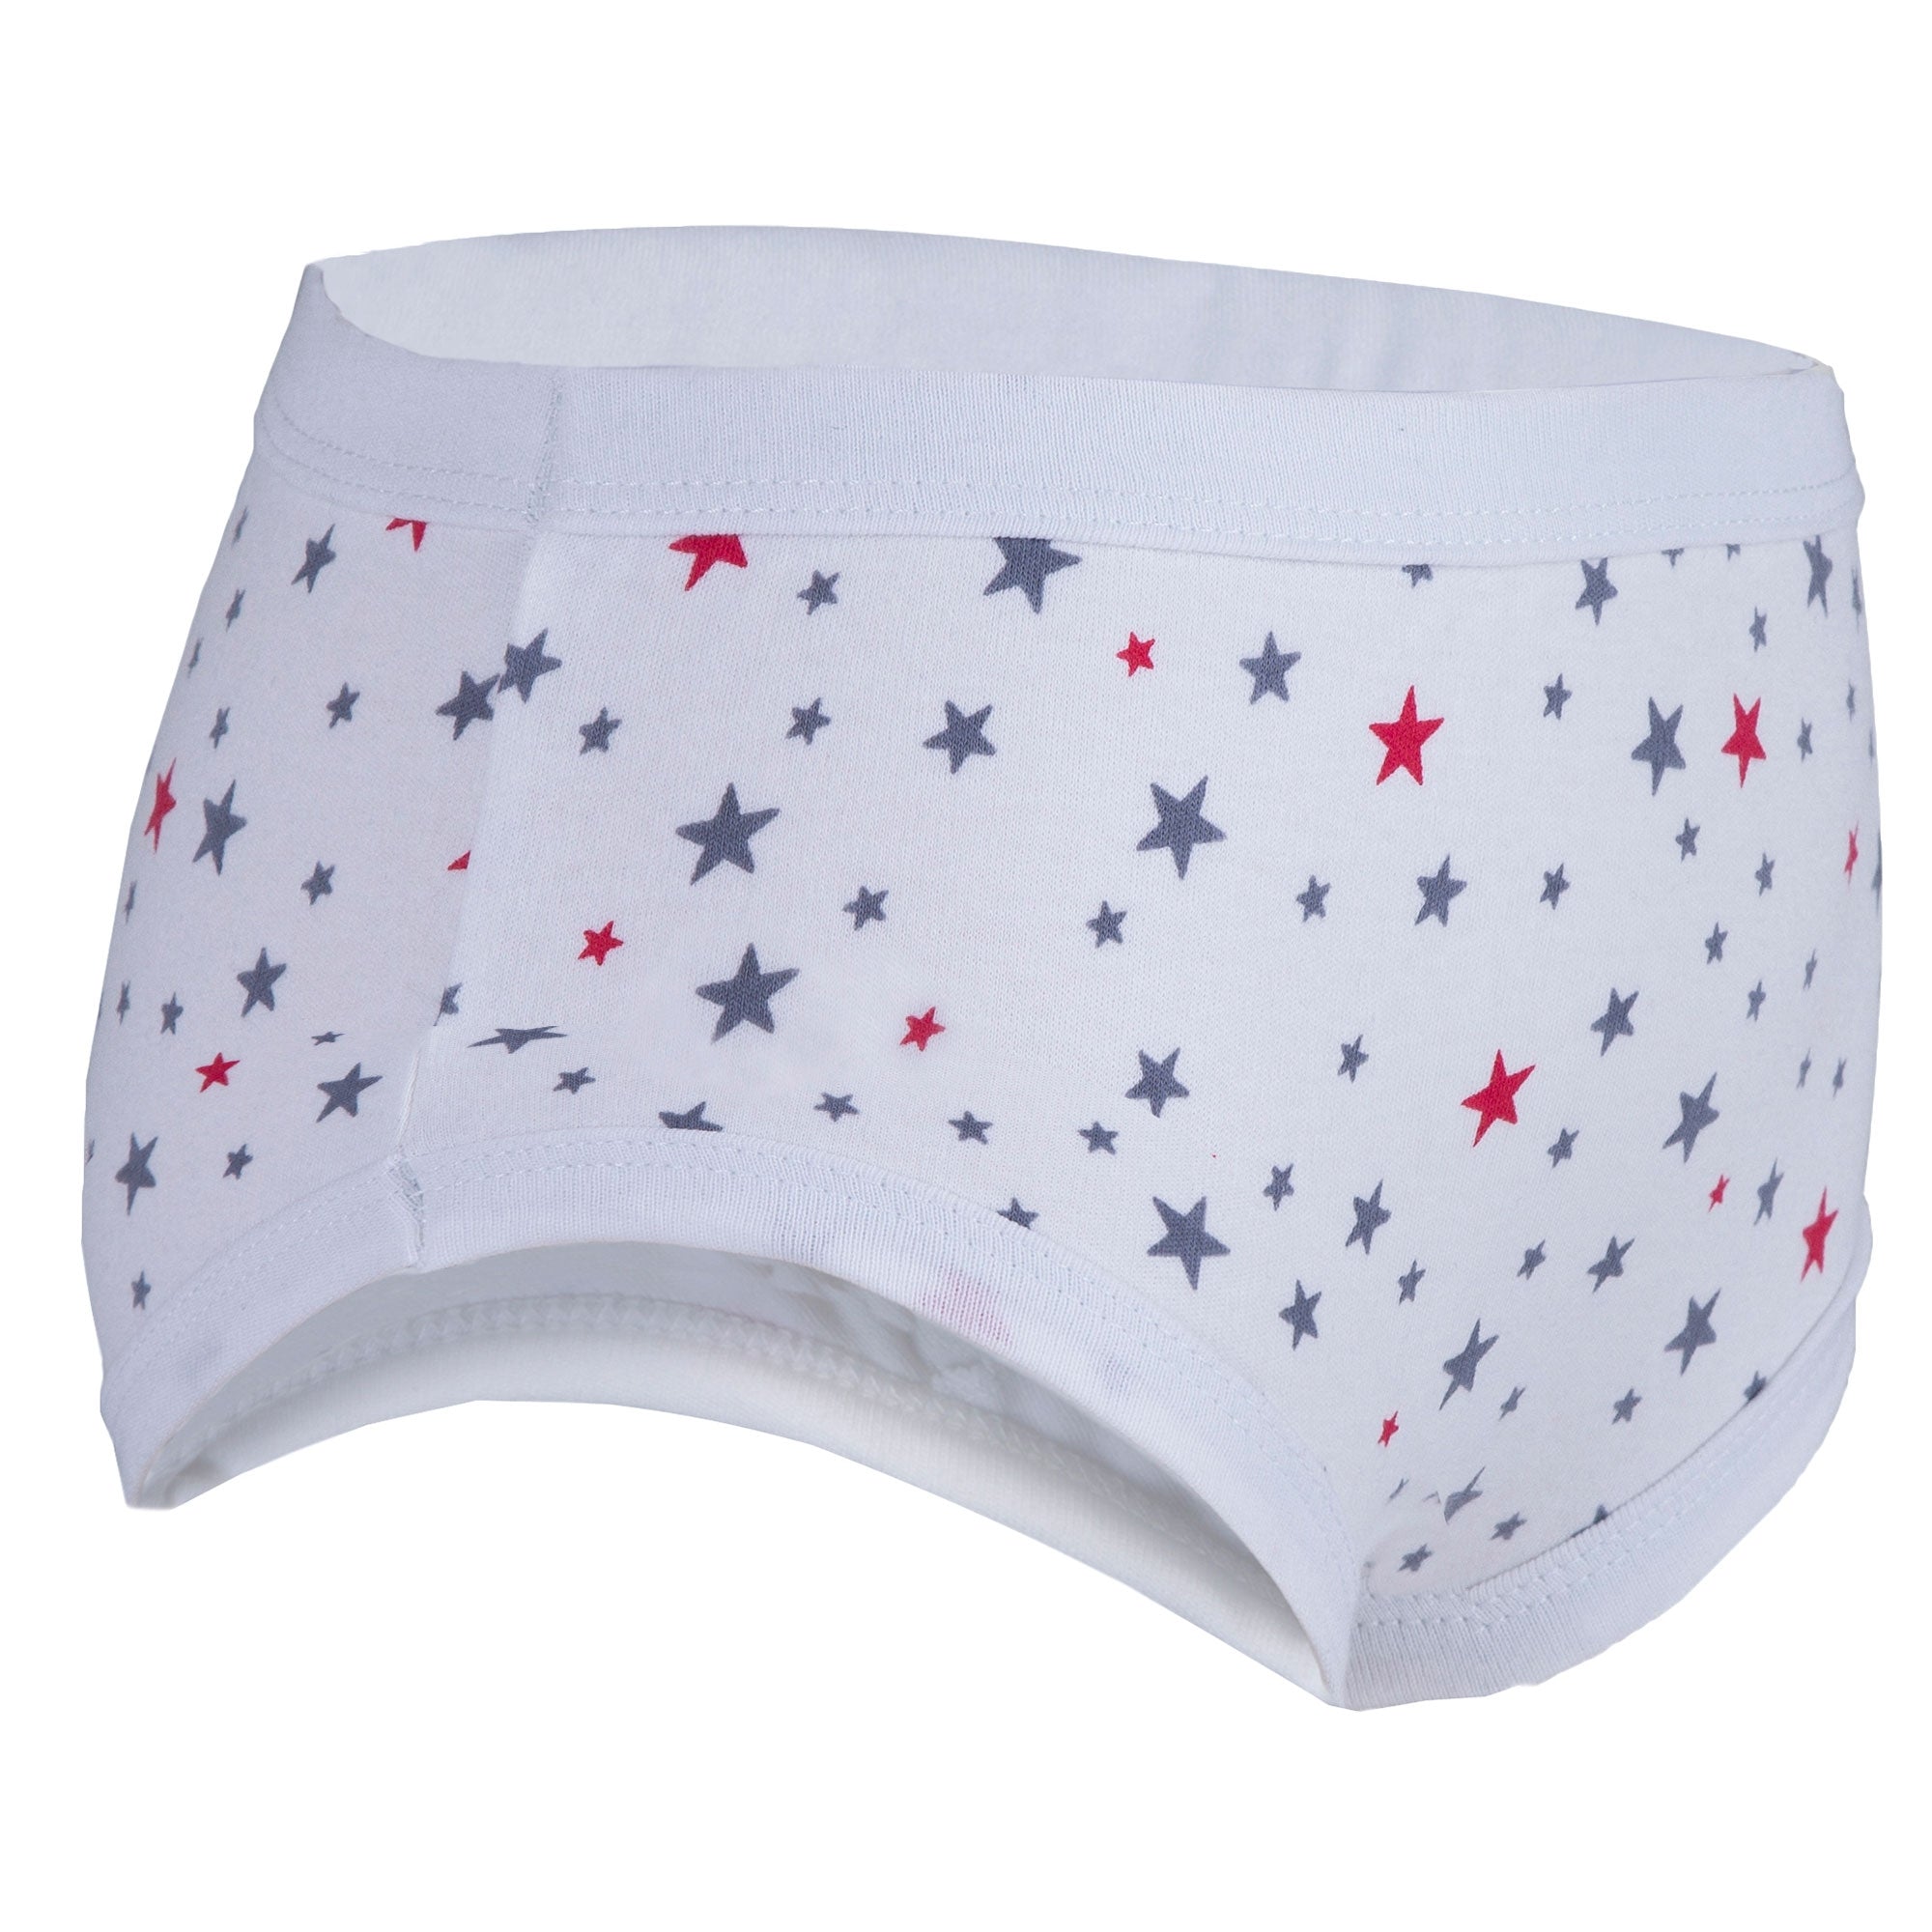  BATTEWA 2-Pack Washable Incontinence Underwear for